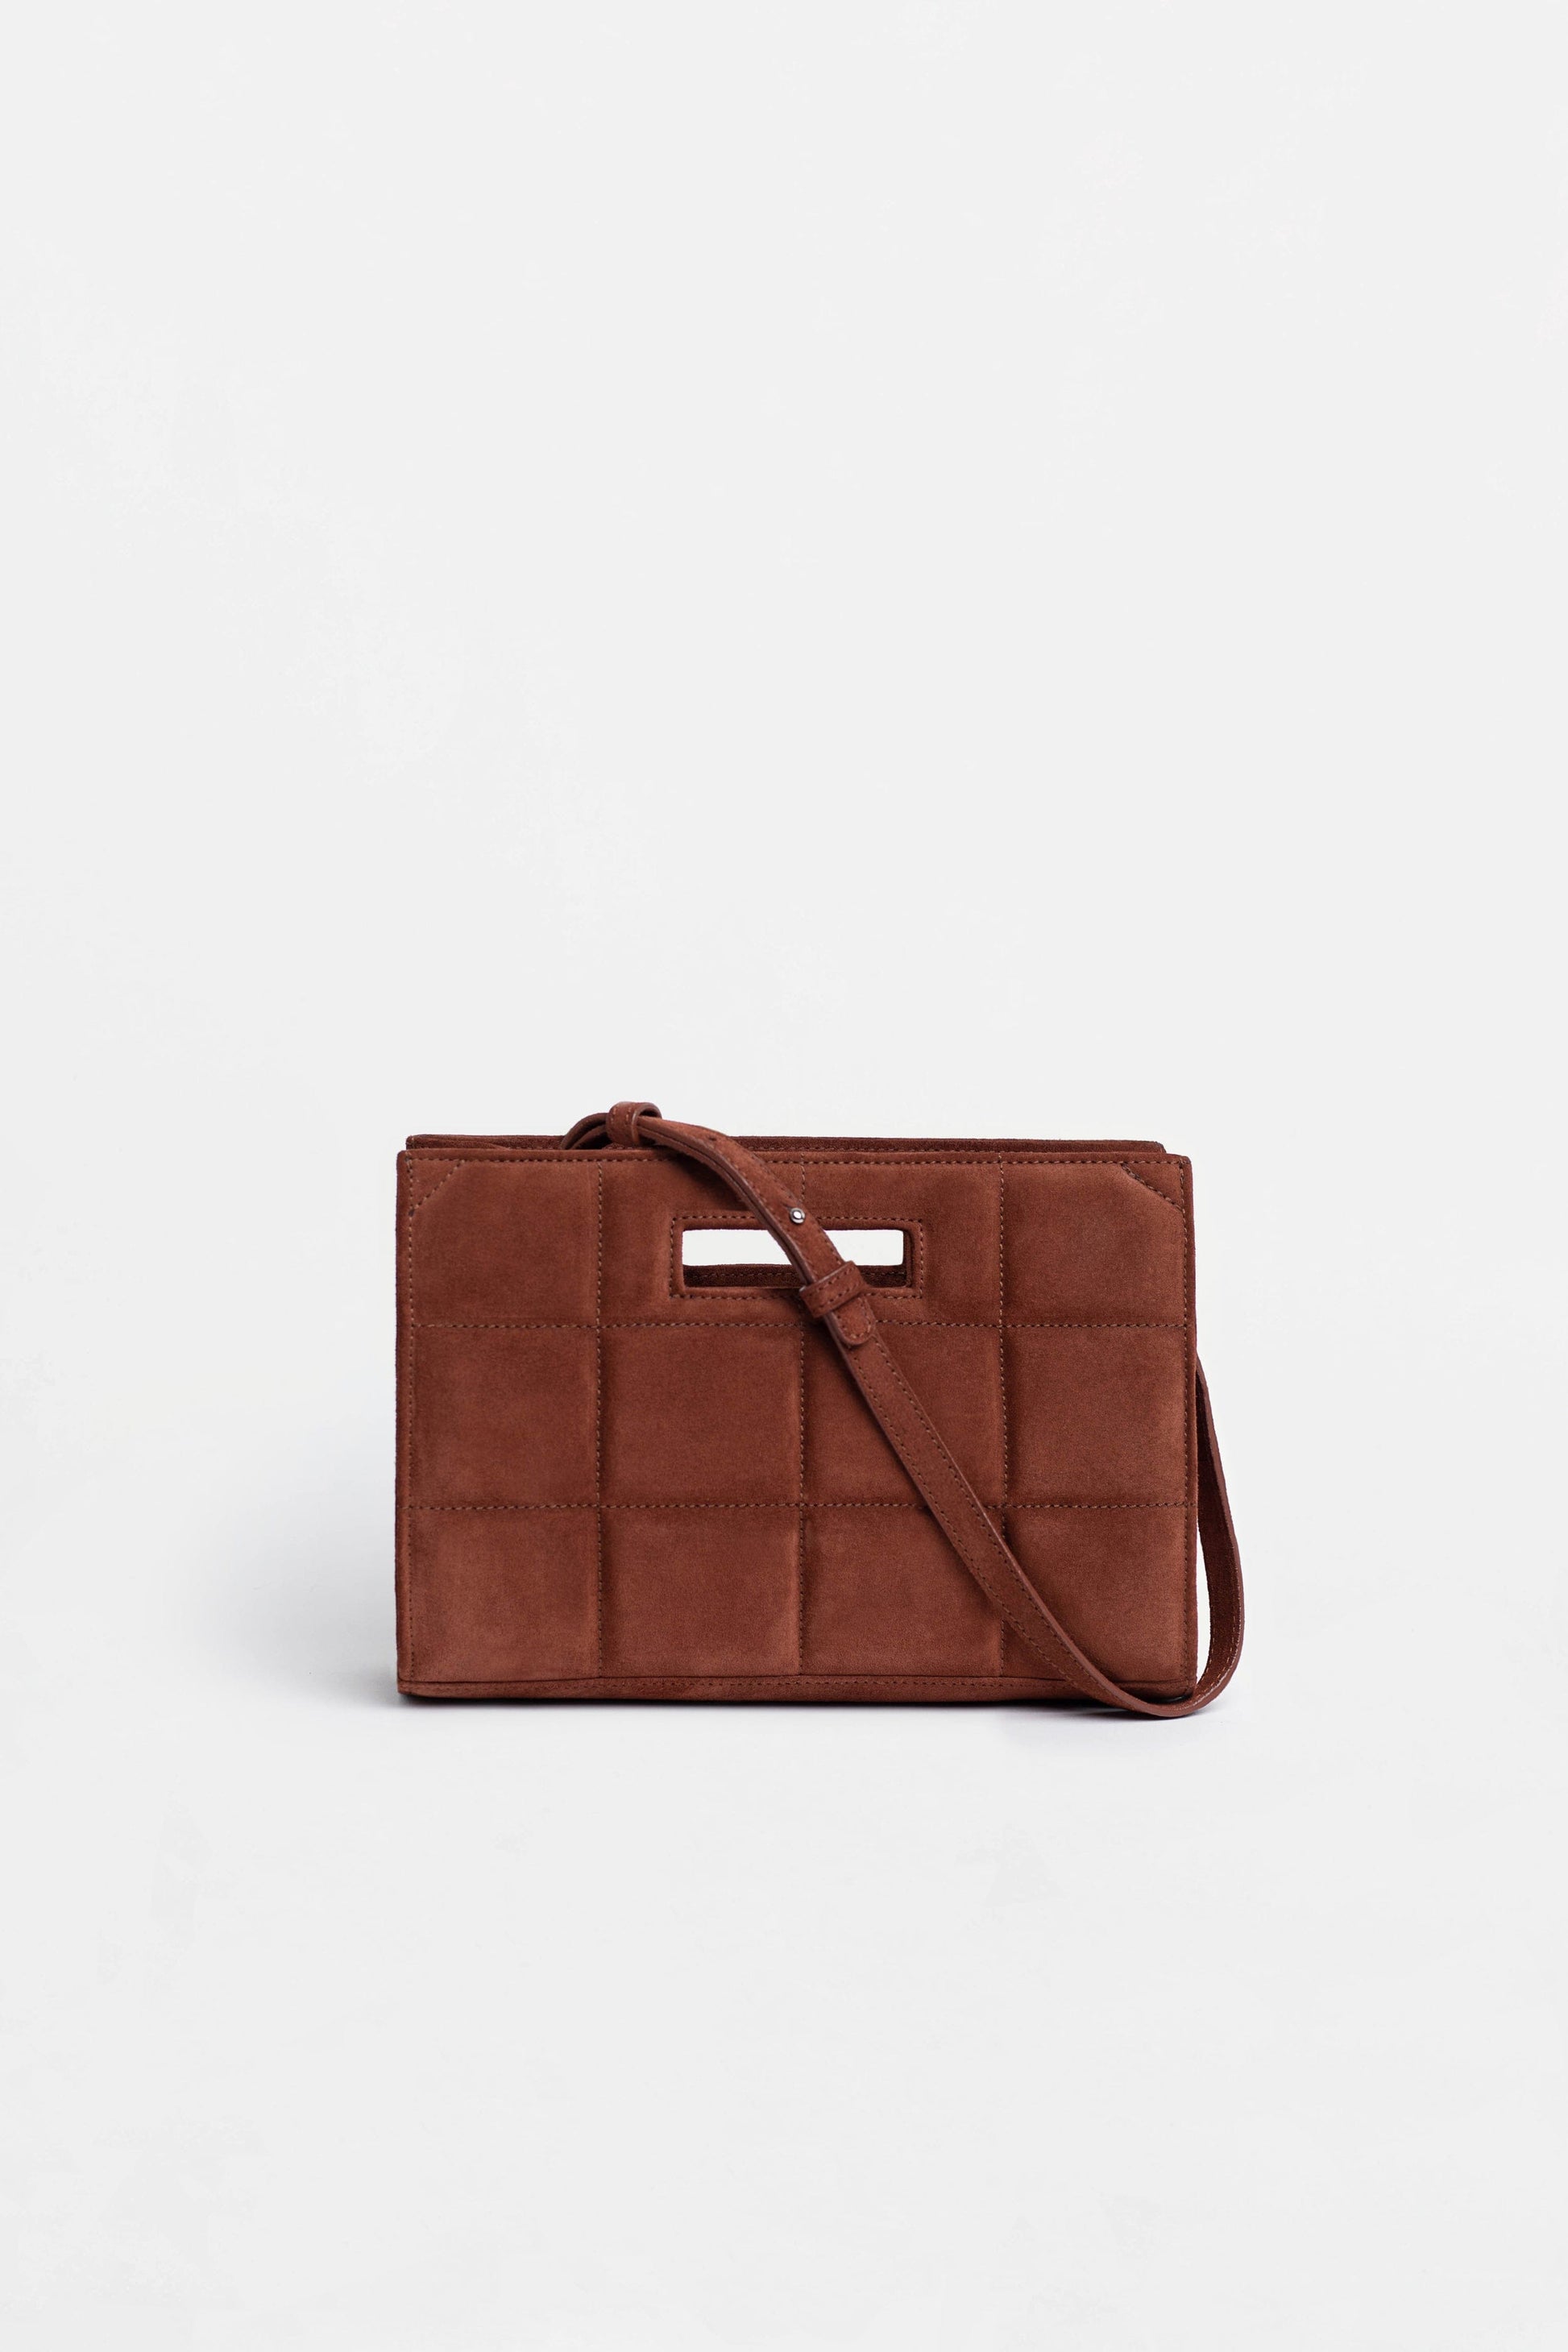 The QUILTED BAG SMALL Redbrown - JULIA SKERGETH